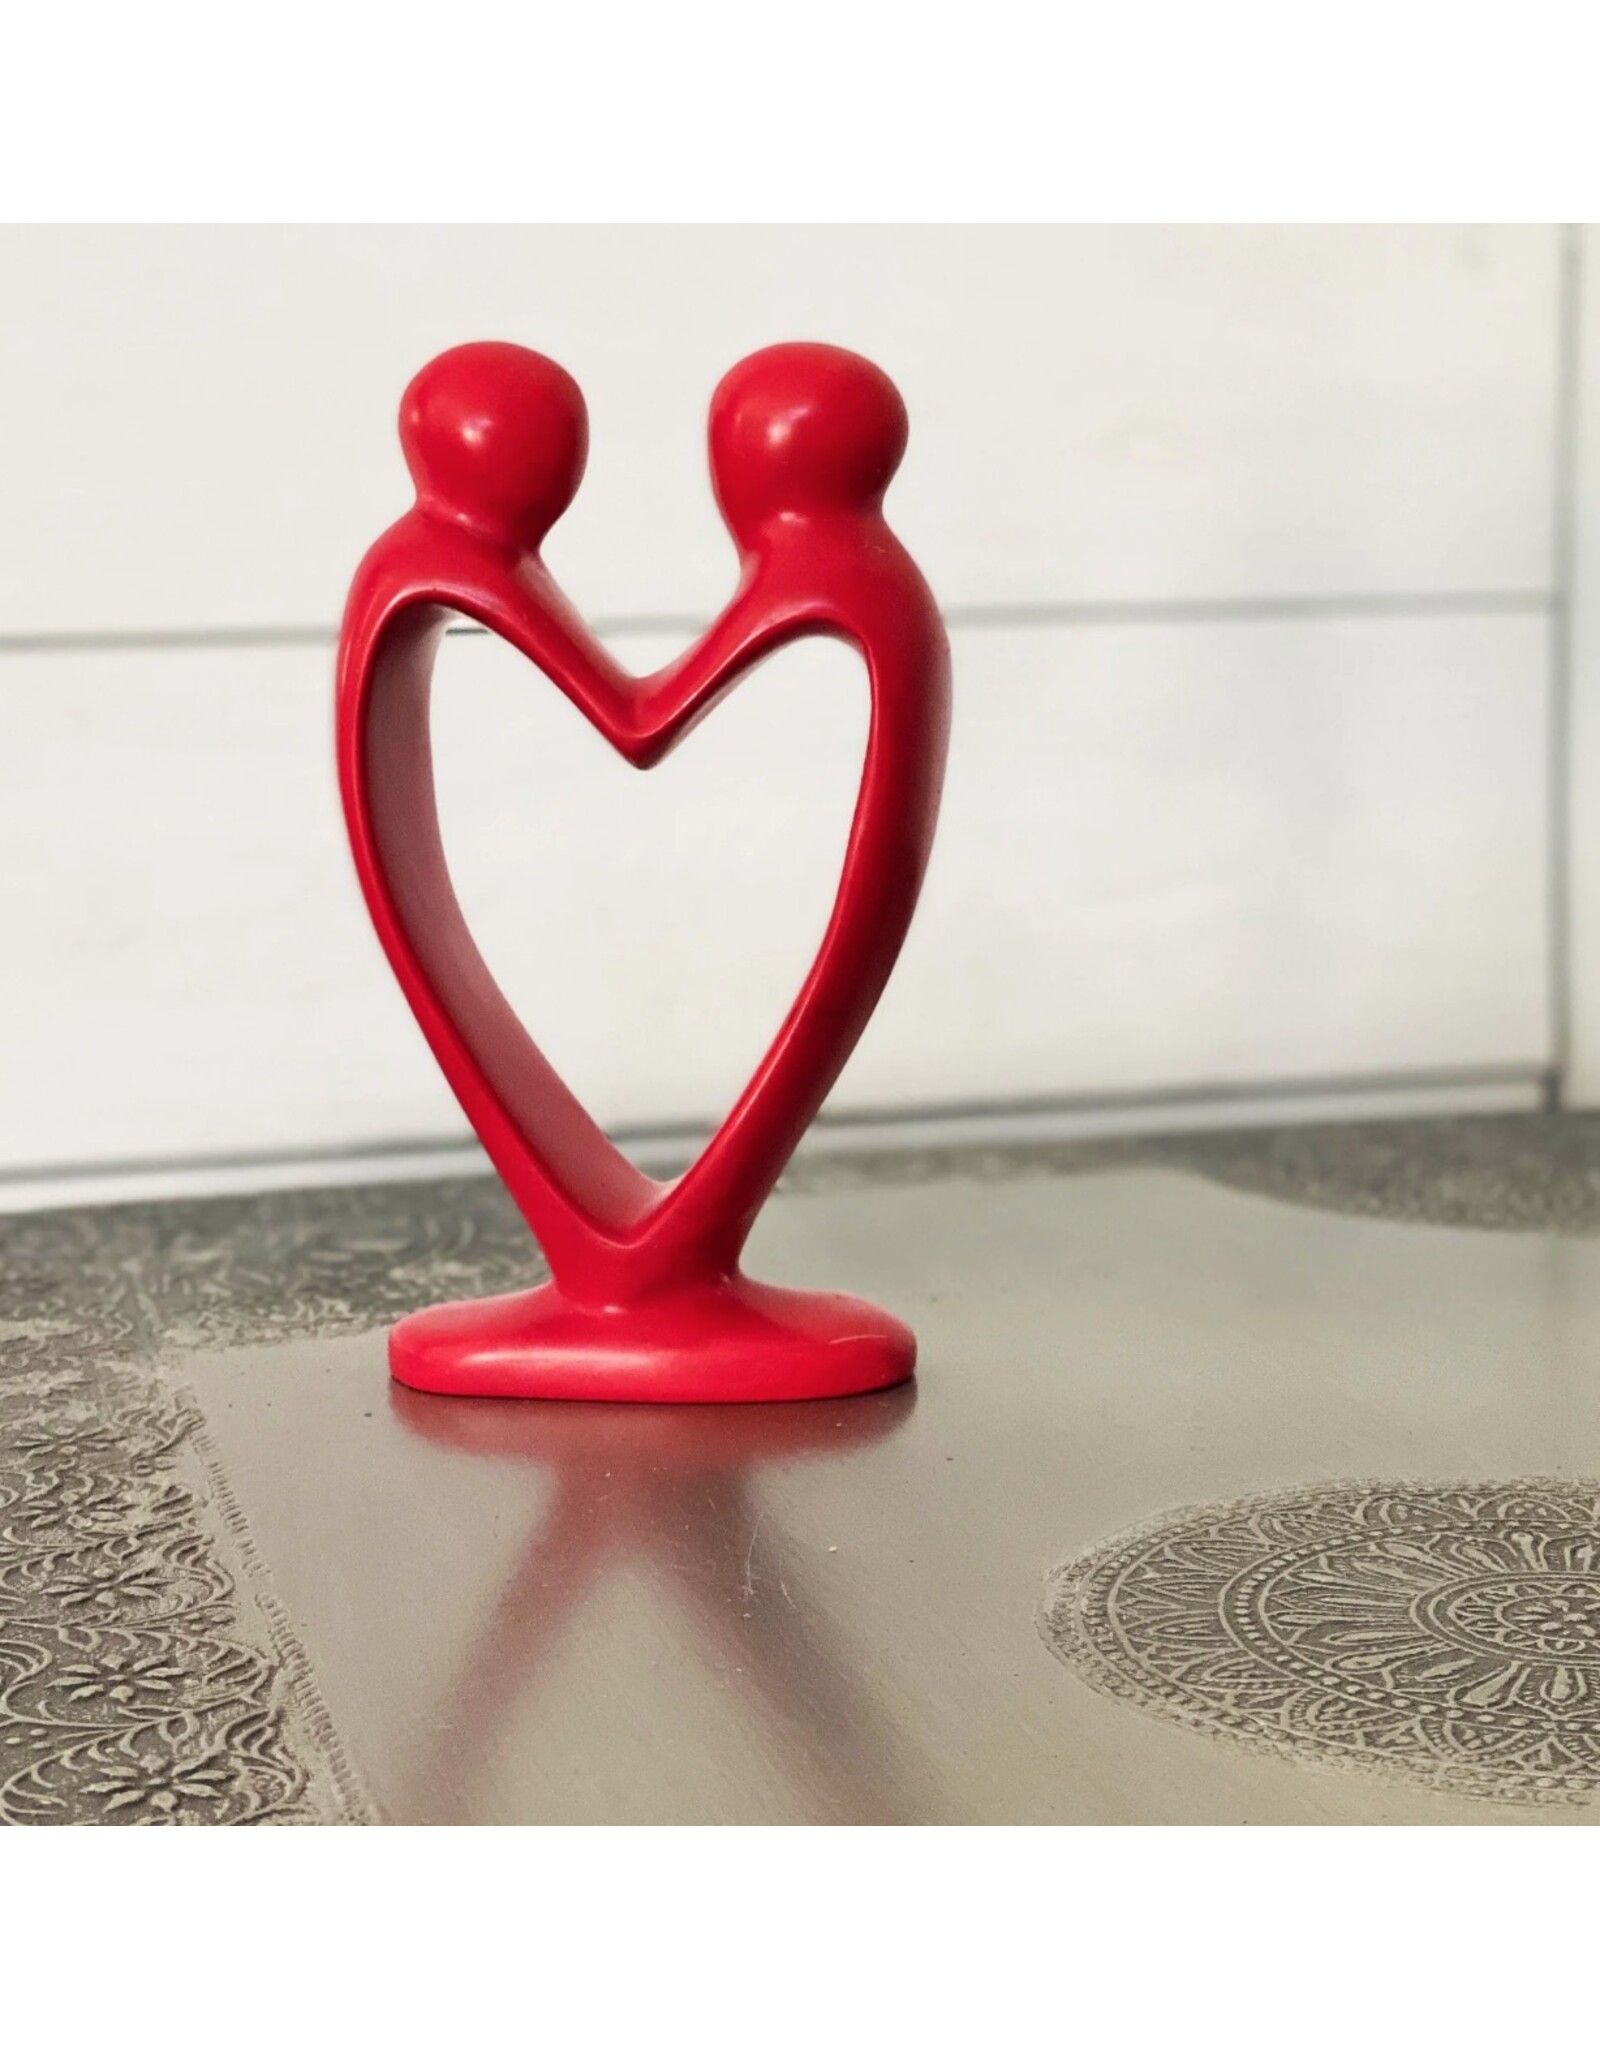 Lover's Heart Soapstone Sculpture in Red